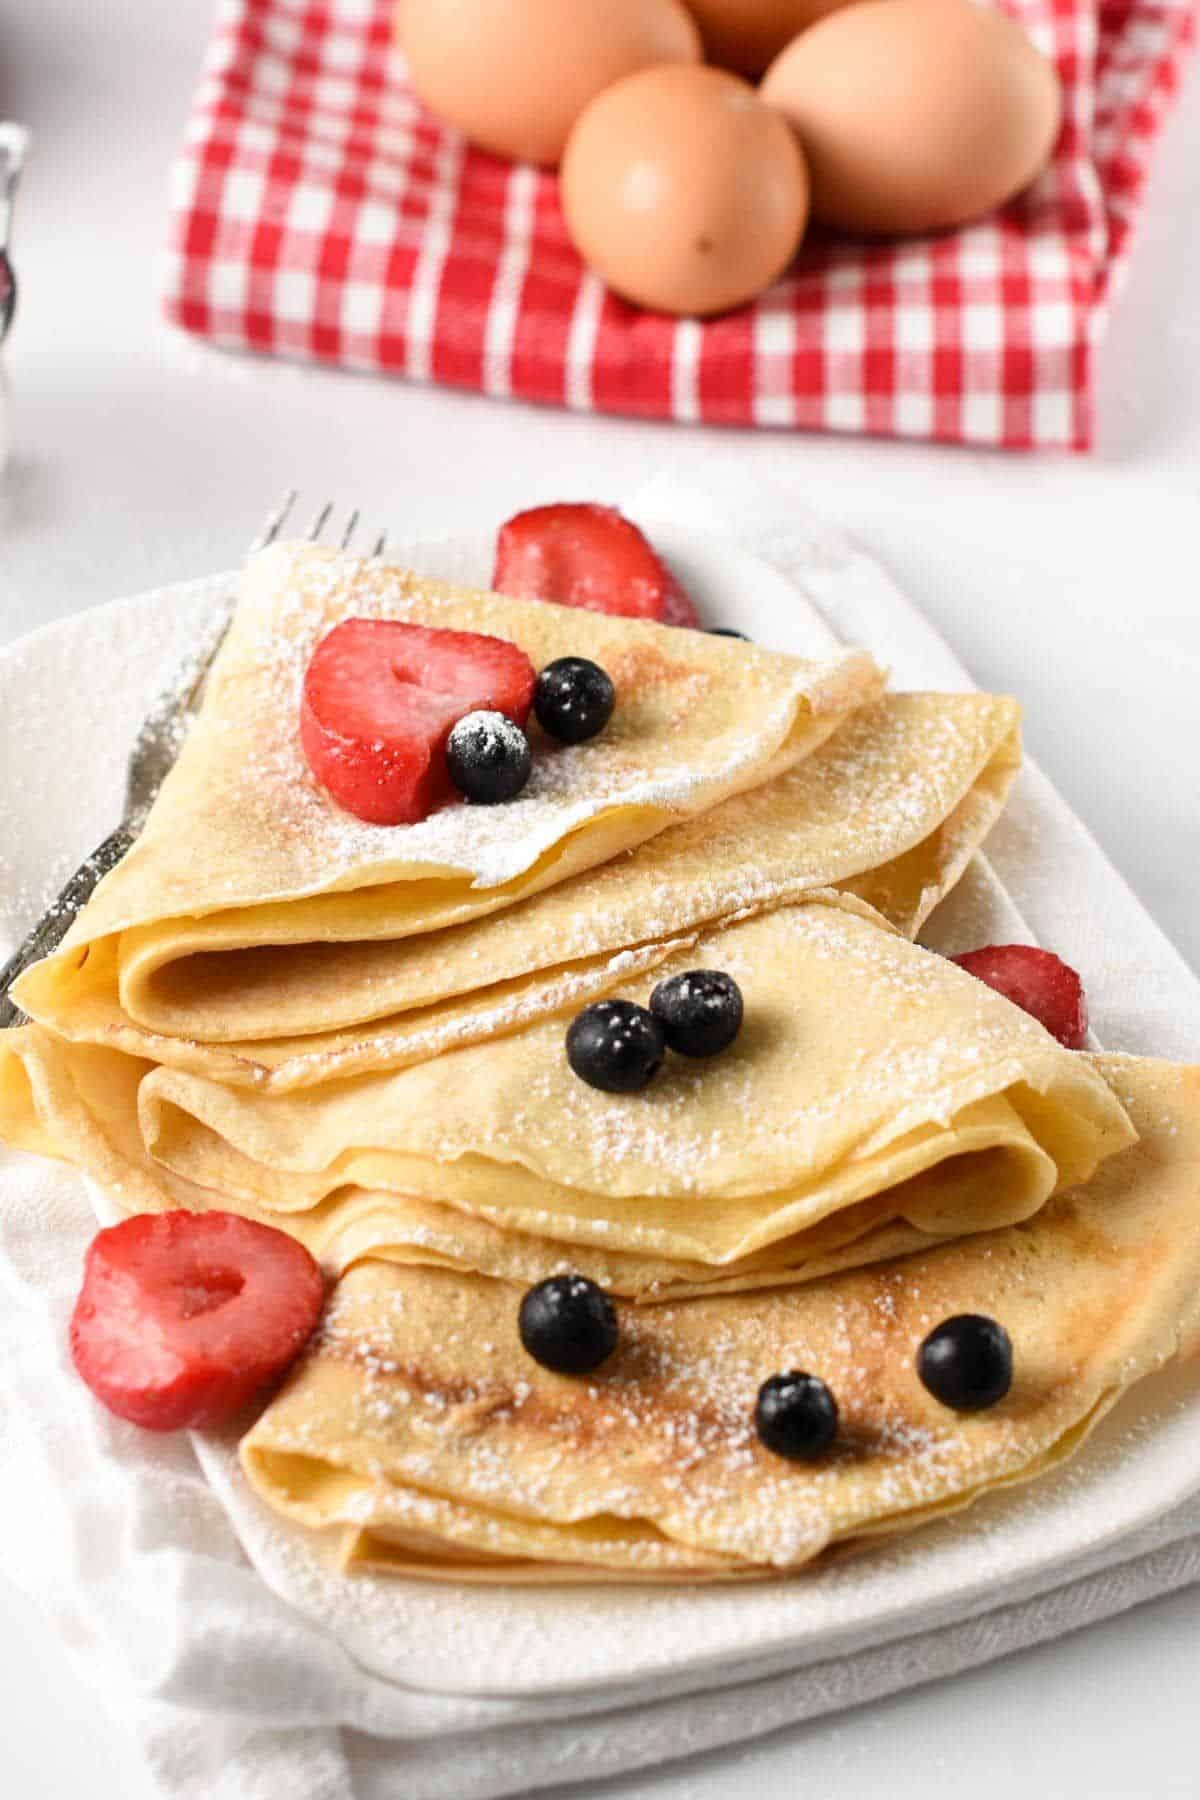 Authentic French Crepes with blueberires and strawberries on the top.